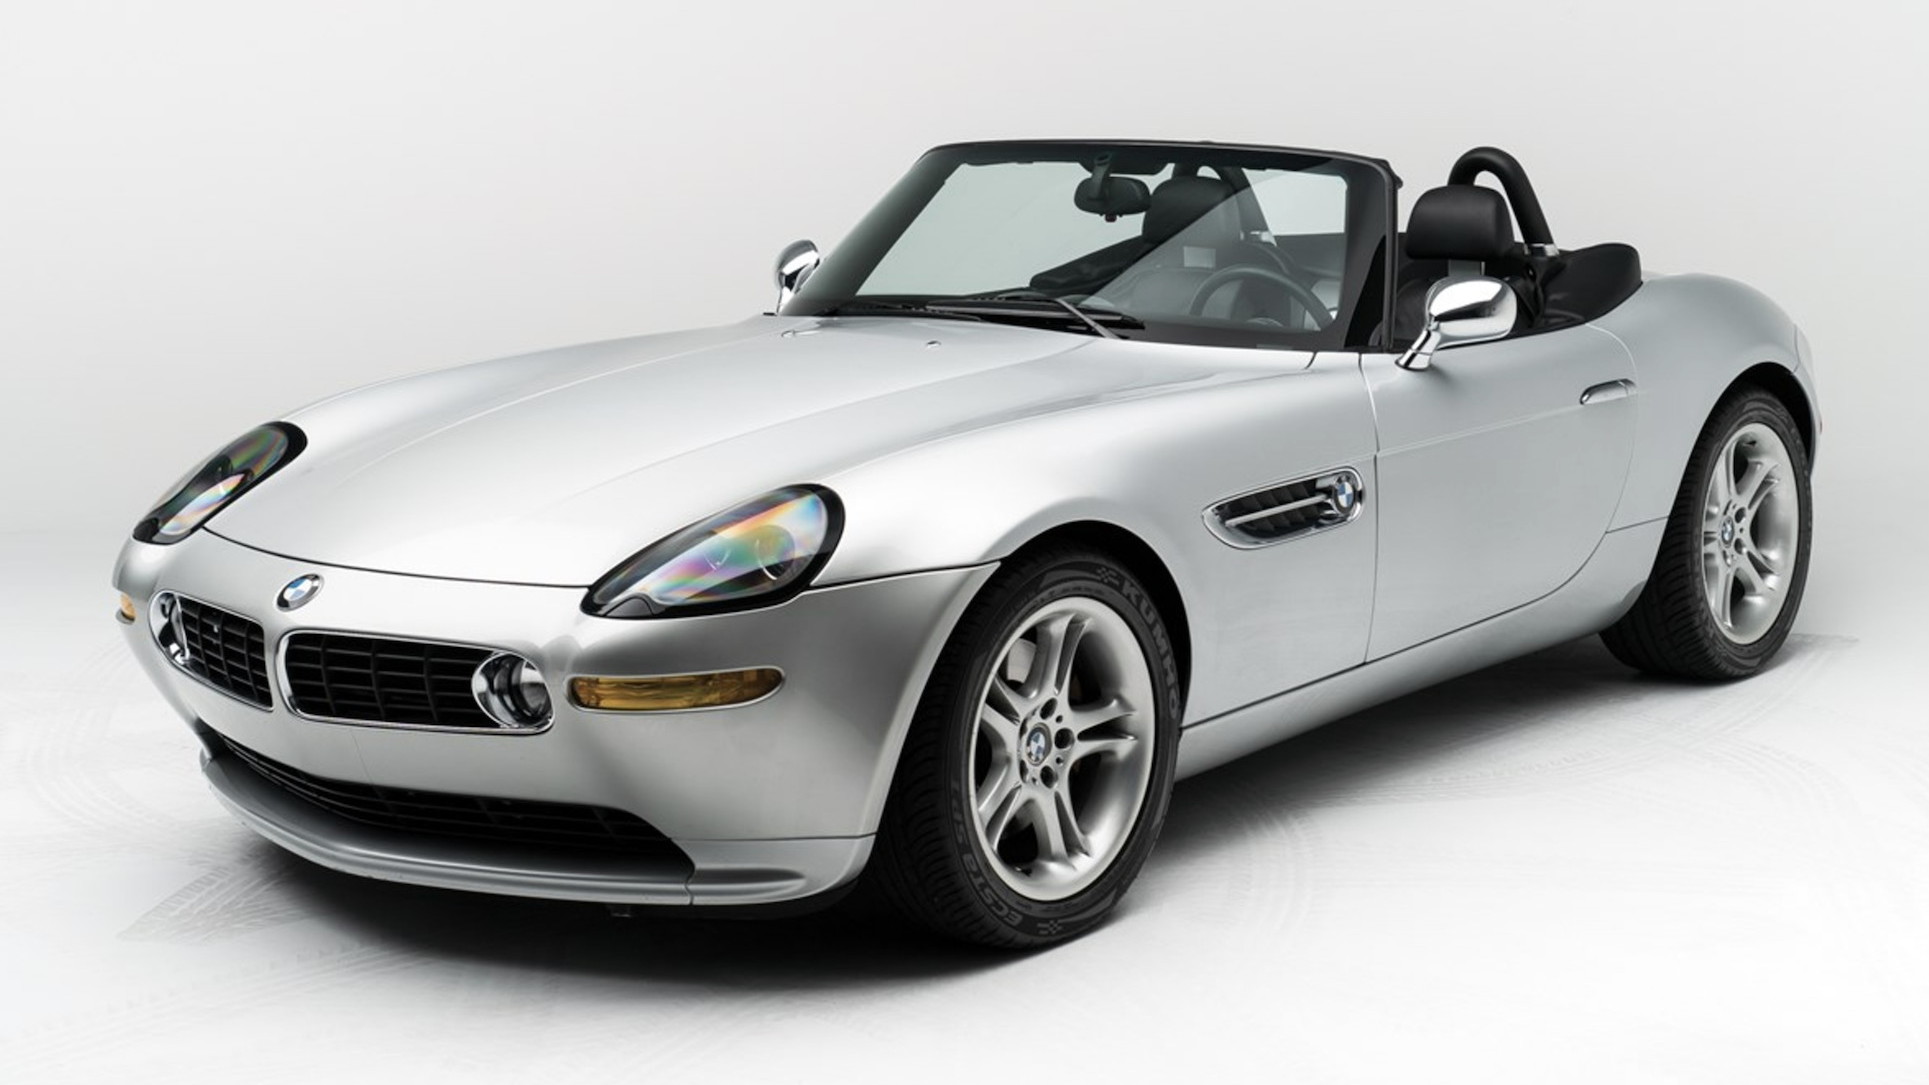 2000 BMW Z8 owned by Steve Jobs